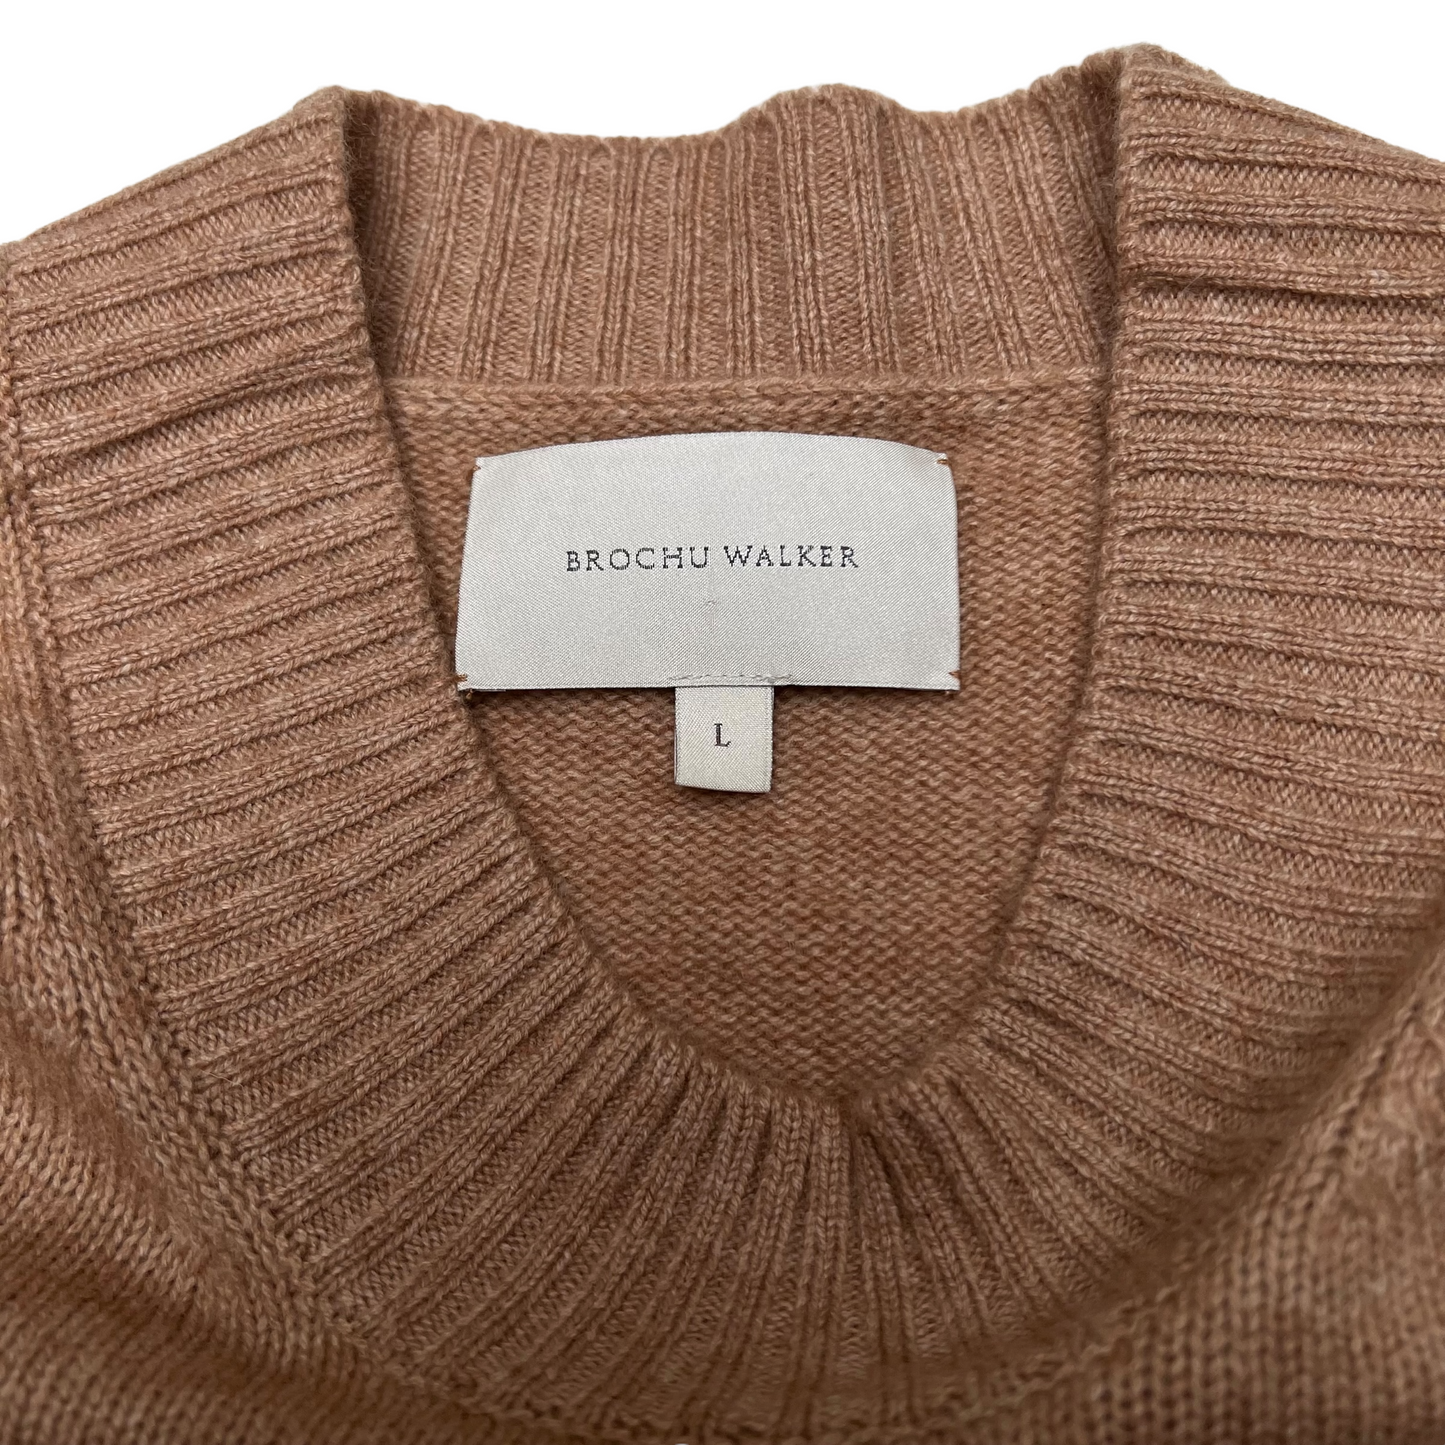 Beige Sweater with Shirt Detail - L